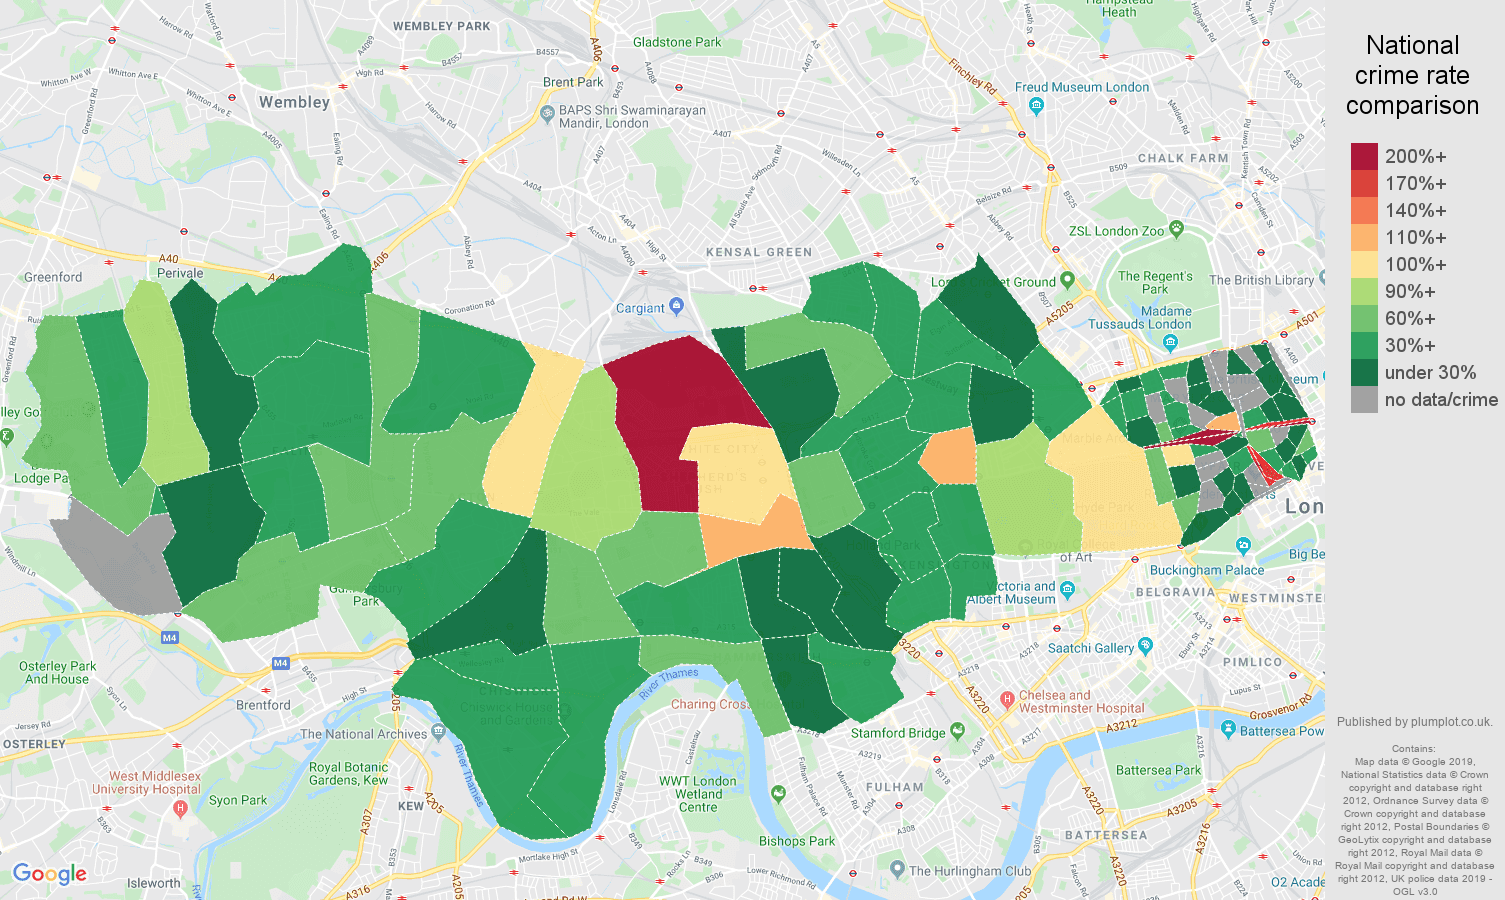 West London other crime rate comparison map